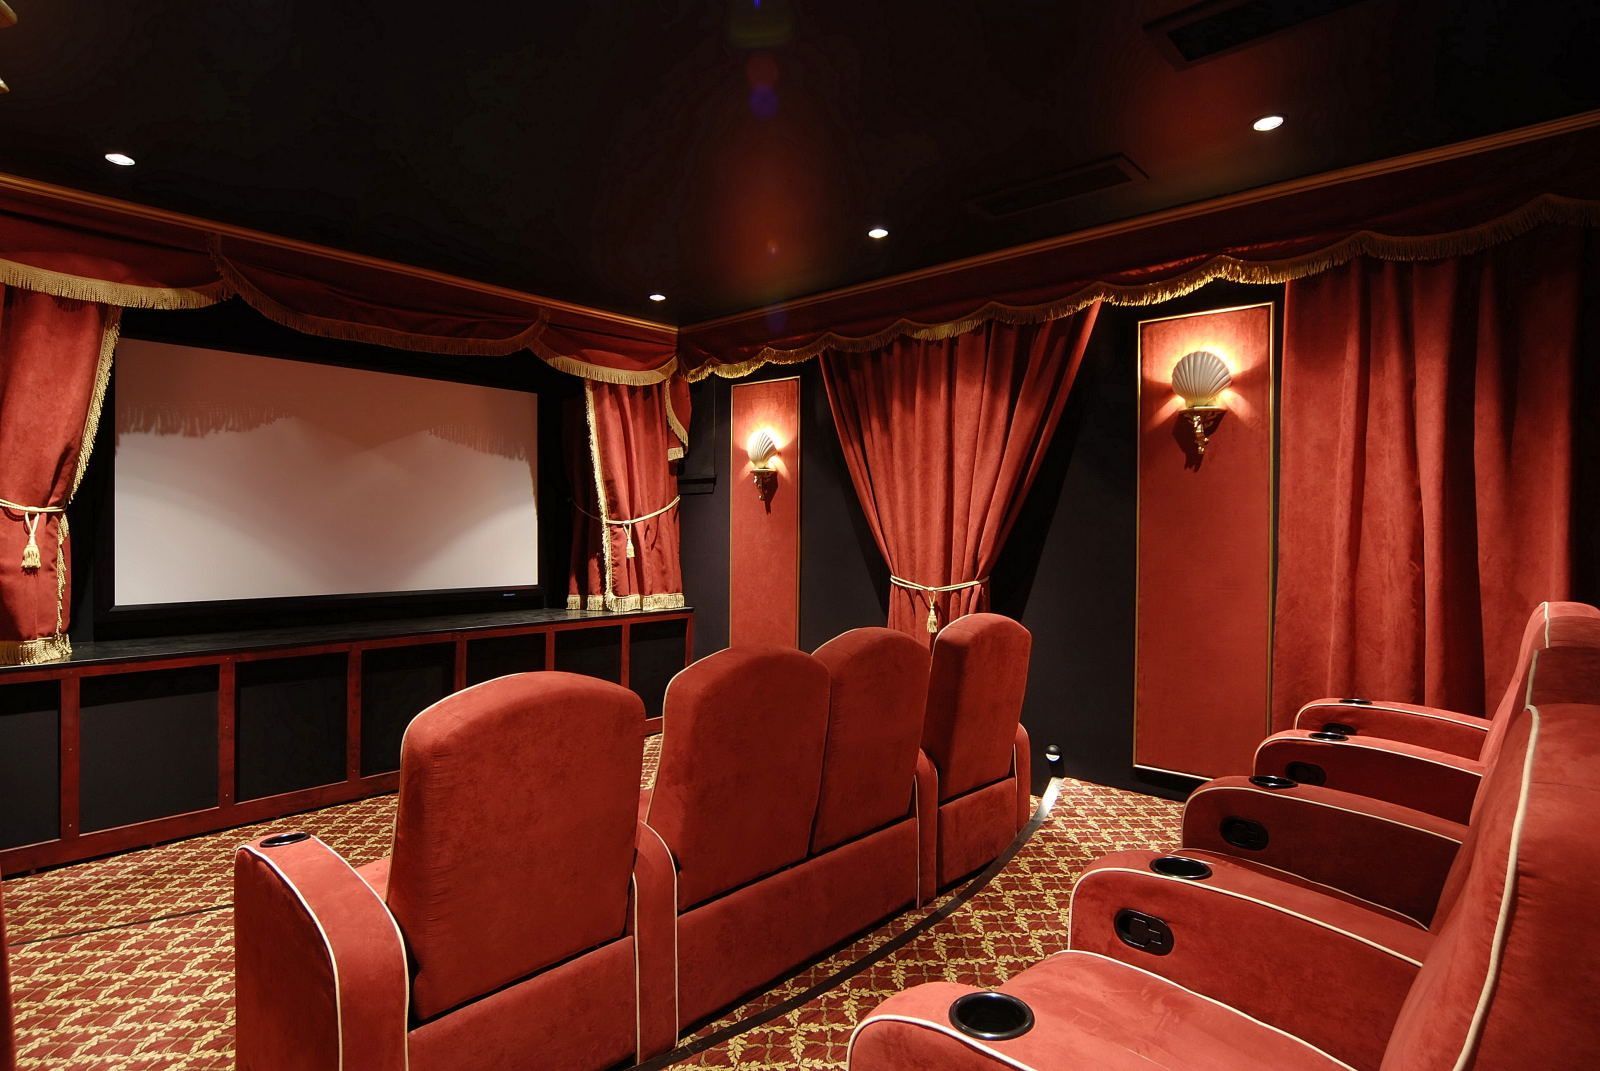 Home Theater Wallpaper. Home theater decor, Home theater rooms